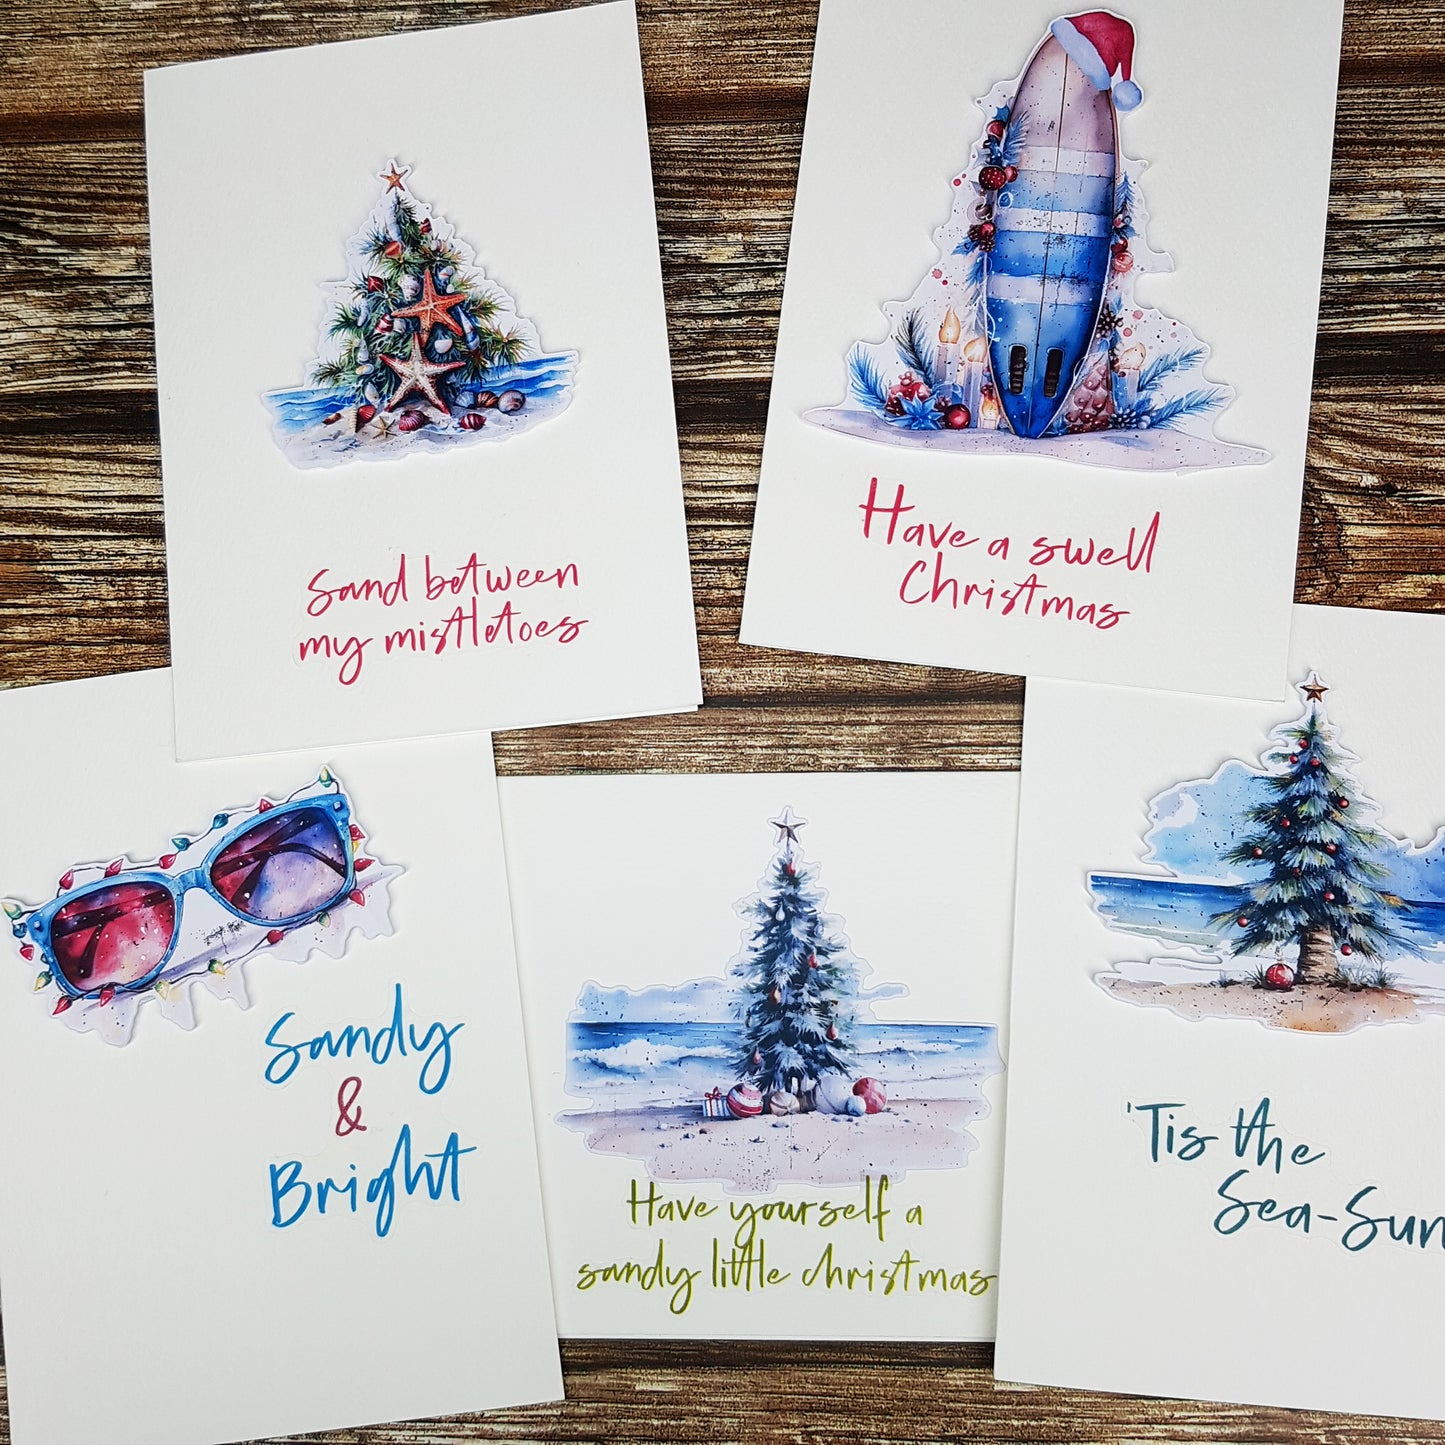 Sandy & Bright Christmas Decorative Stickers with festive punny sentiments